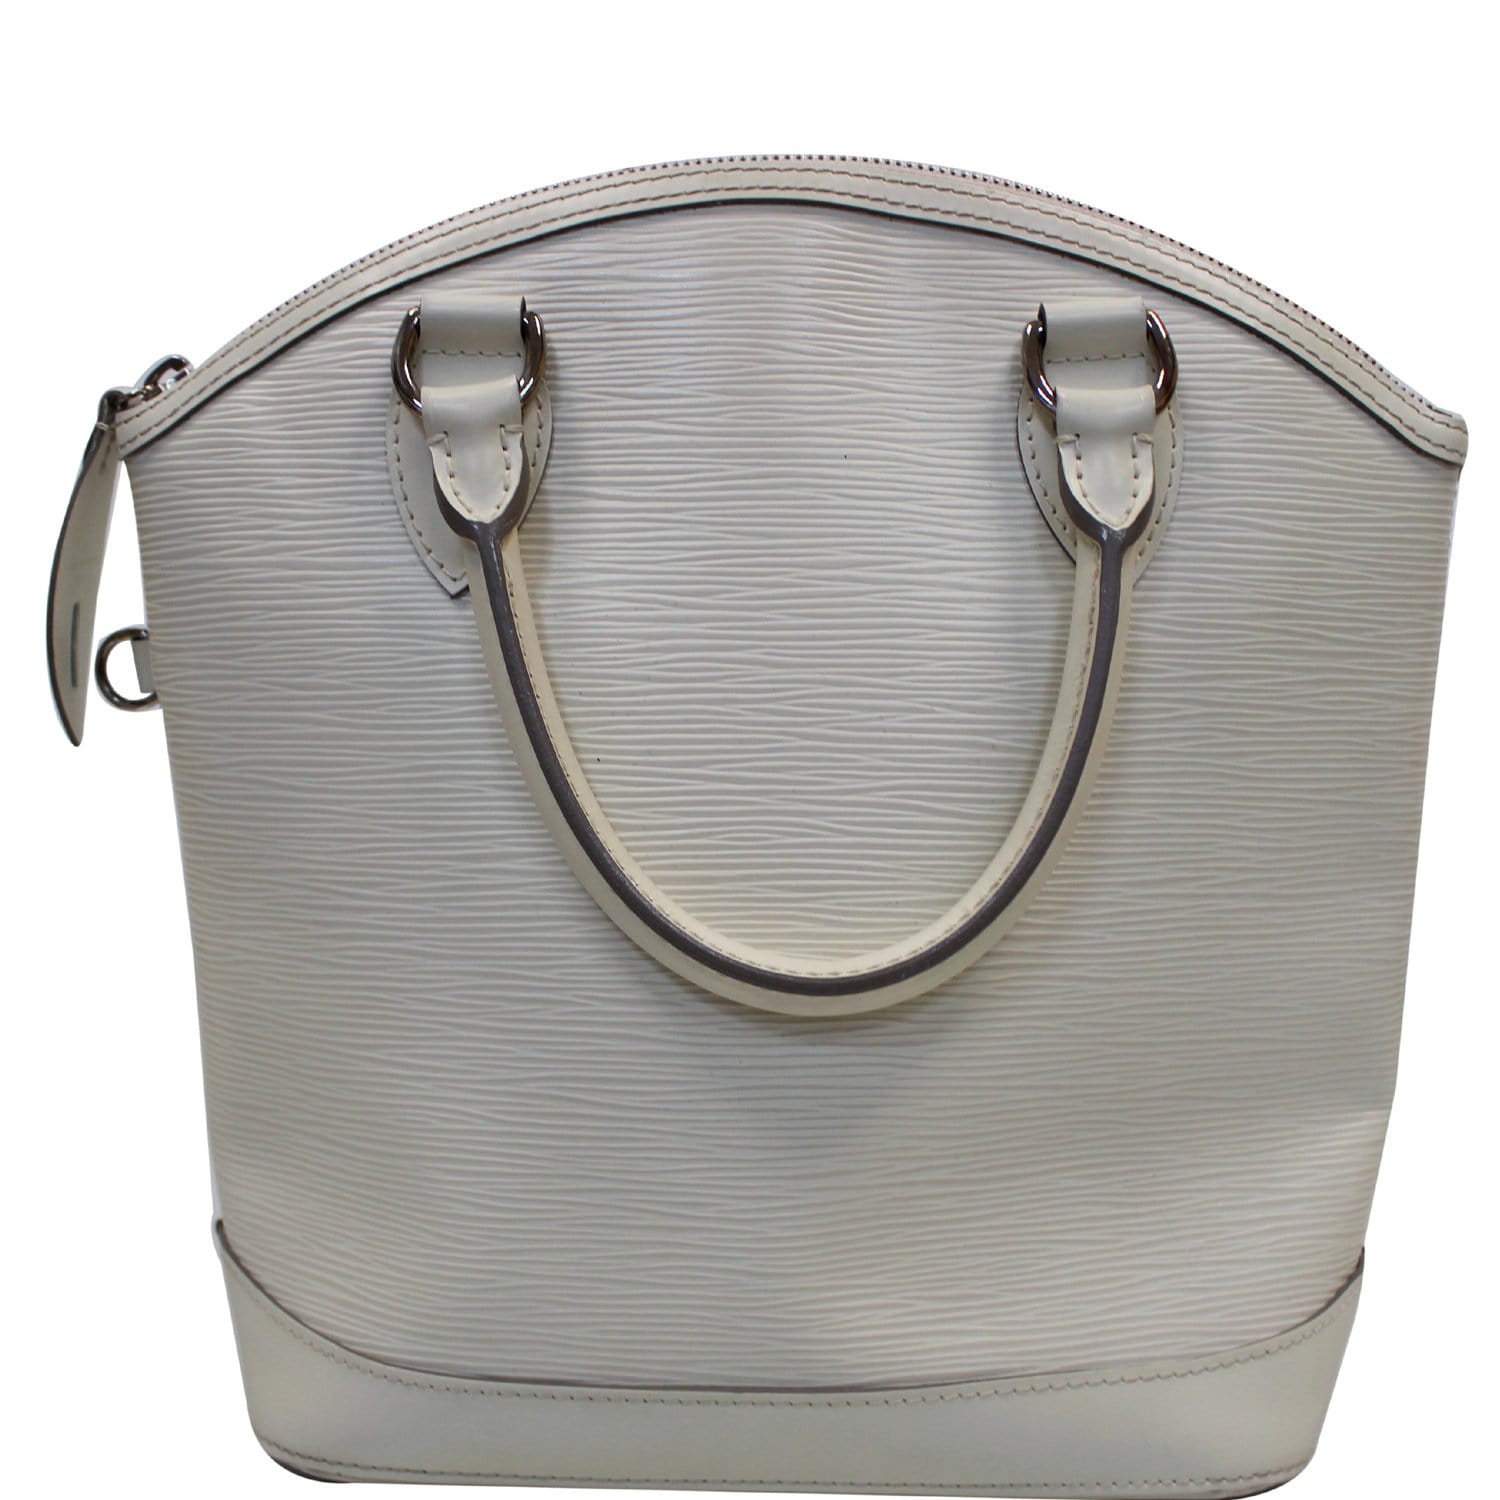 Lockit vertical leather crossbody bag Louis Vuitton White in